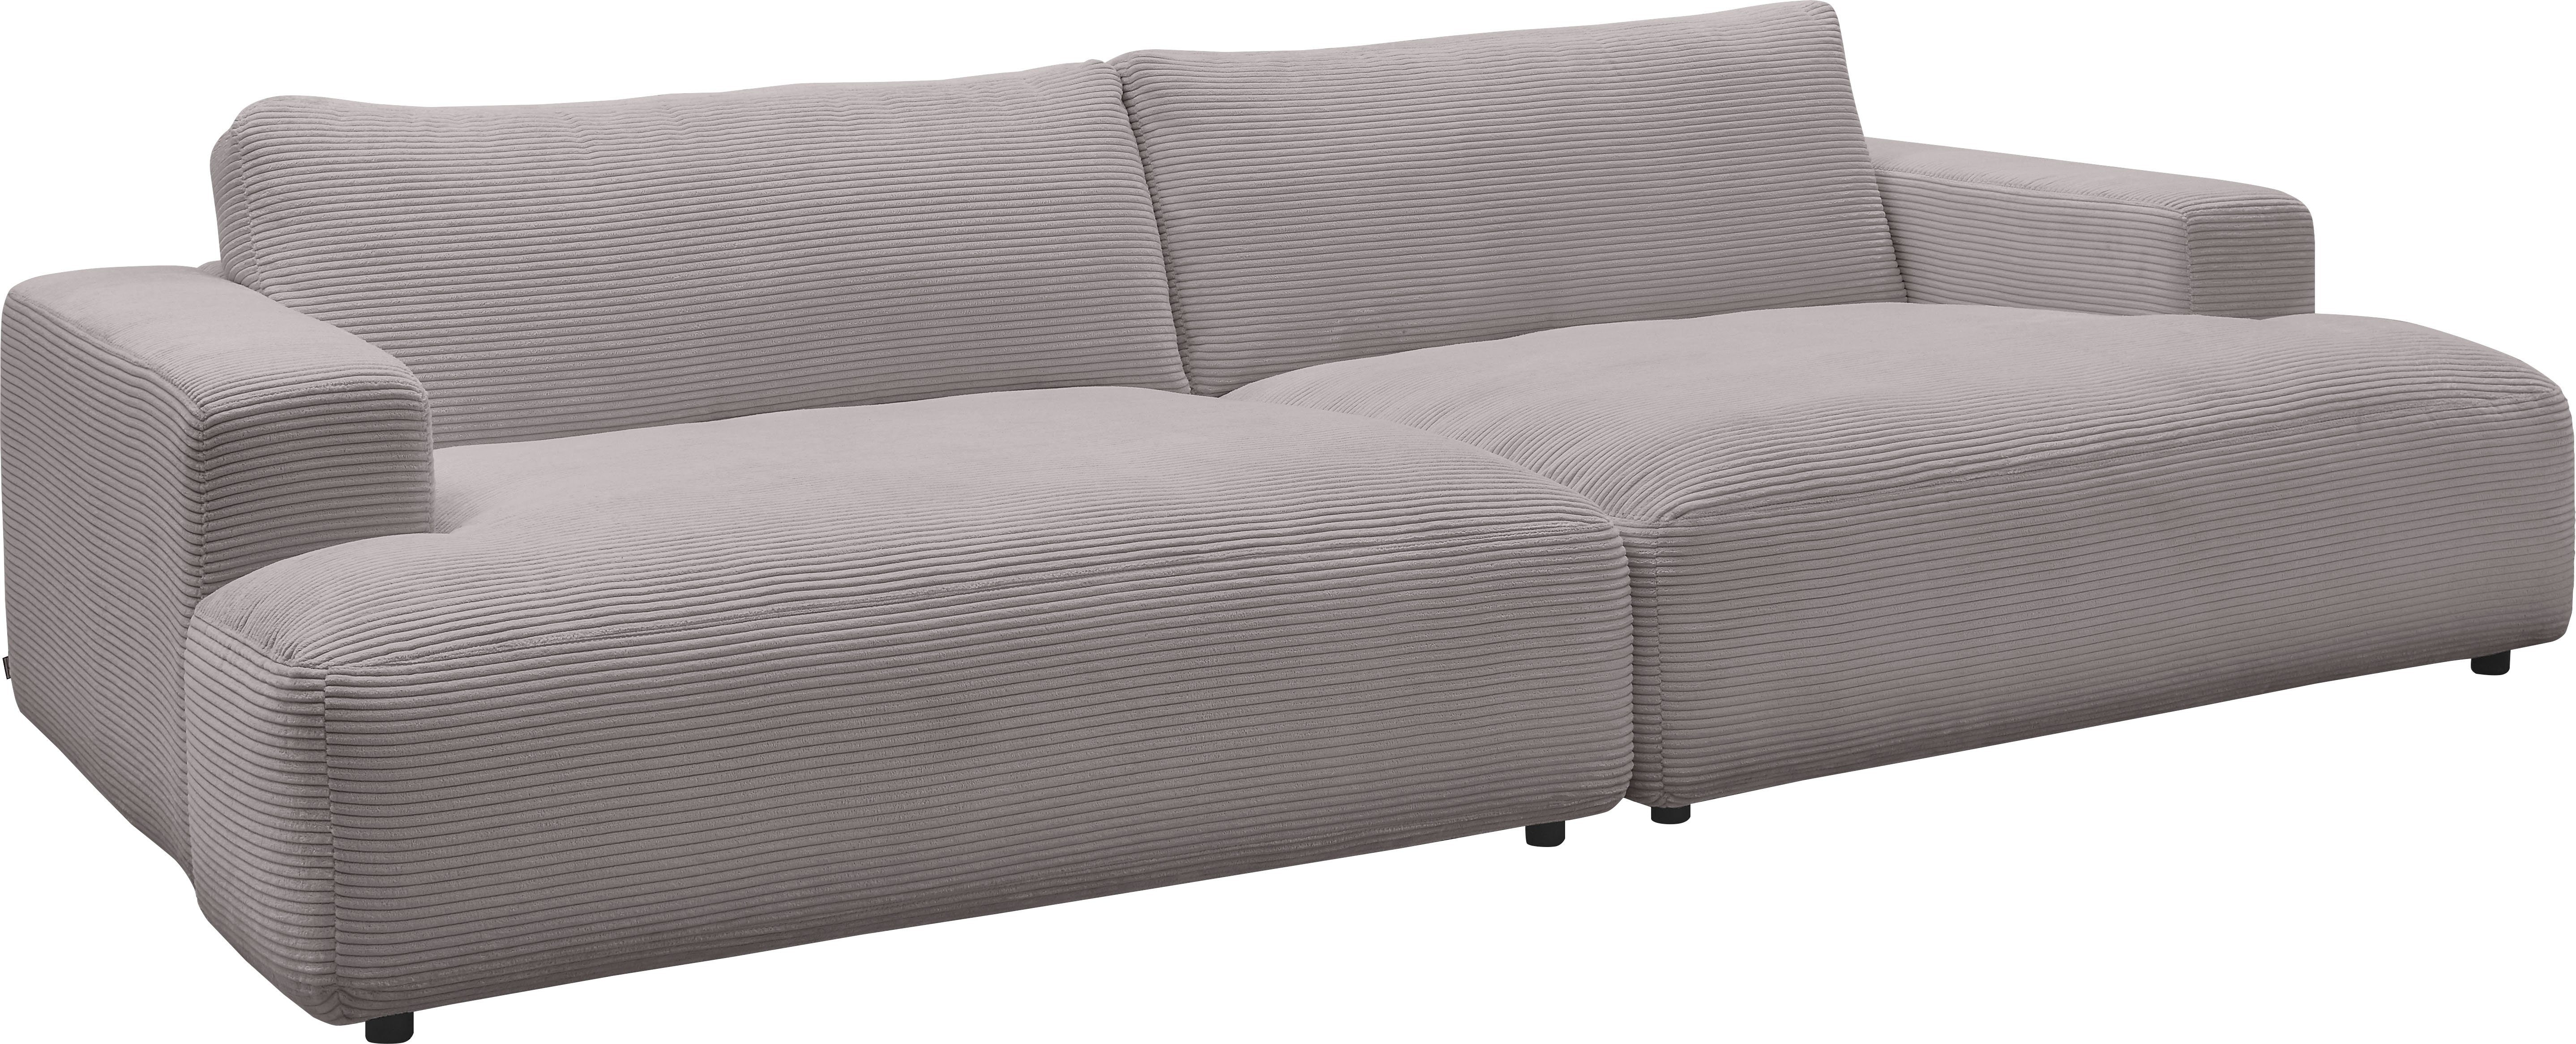 cm by Cord-Bezug, Loungesofa grey 292 Lucia, Musterring branded GALLERY Breite M